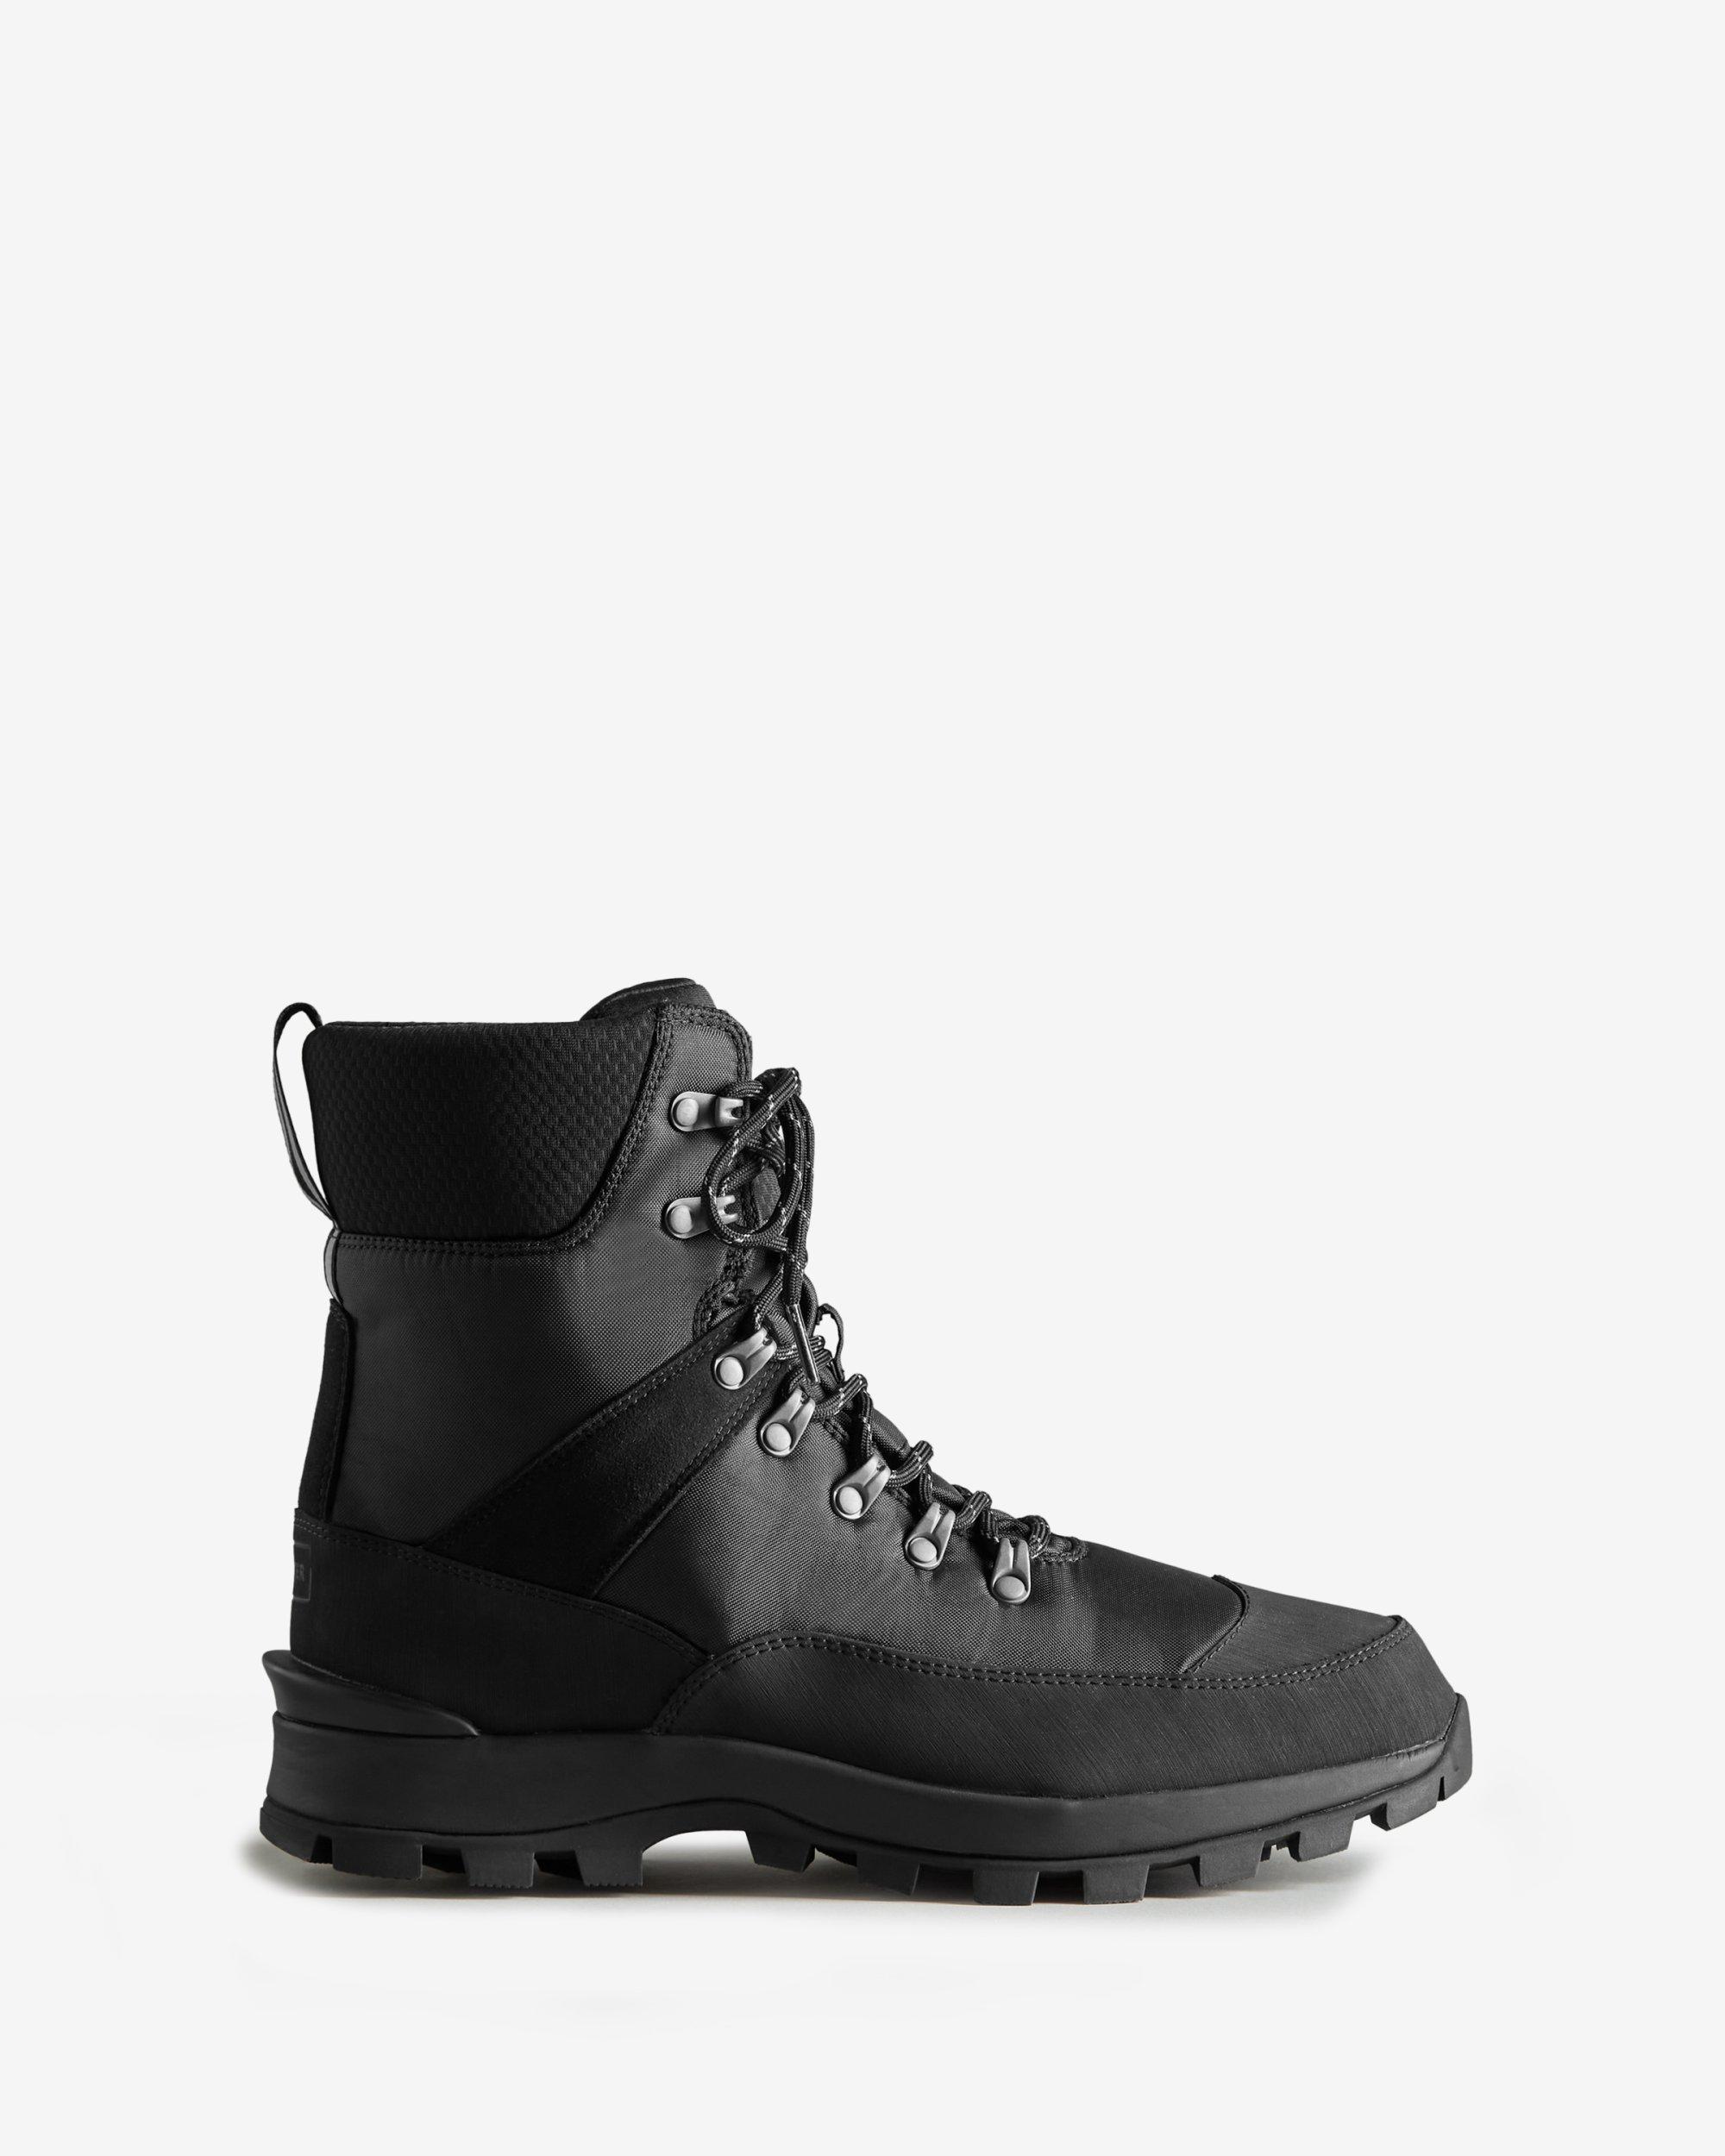 HUNTER Synthetic Explorer Insulated Lace-up Commando Boots in Black for Men Mens Boots HUNTER Boots 